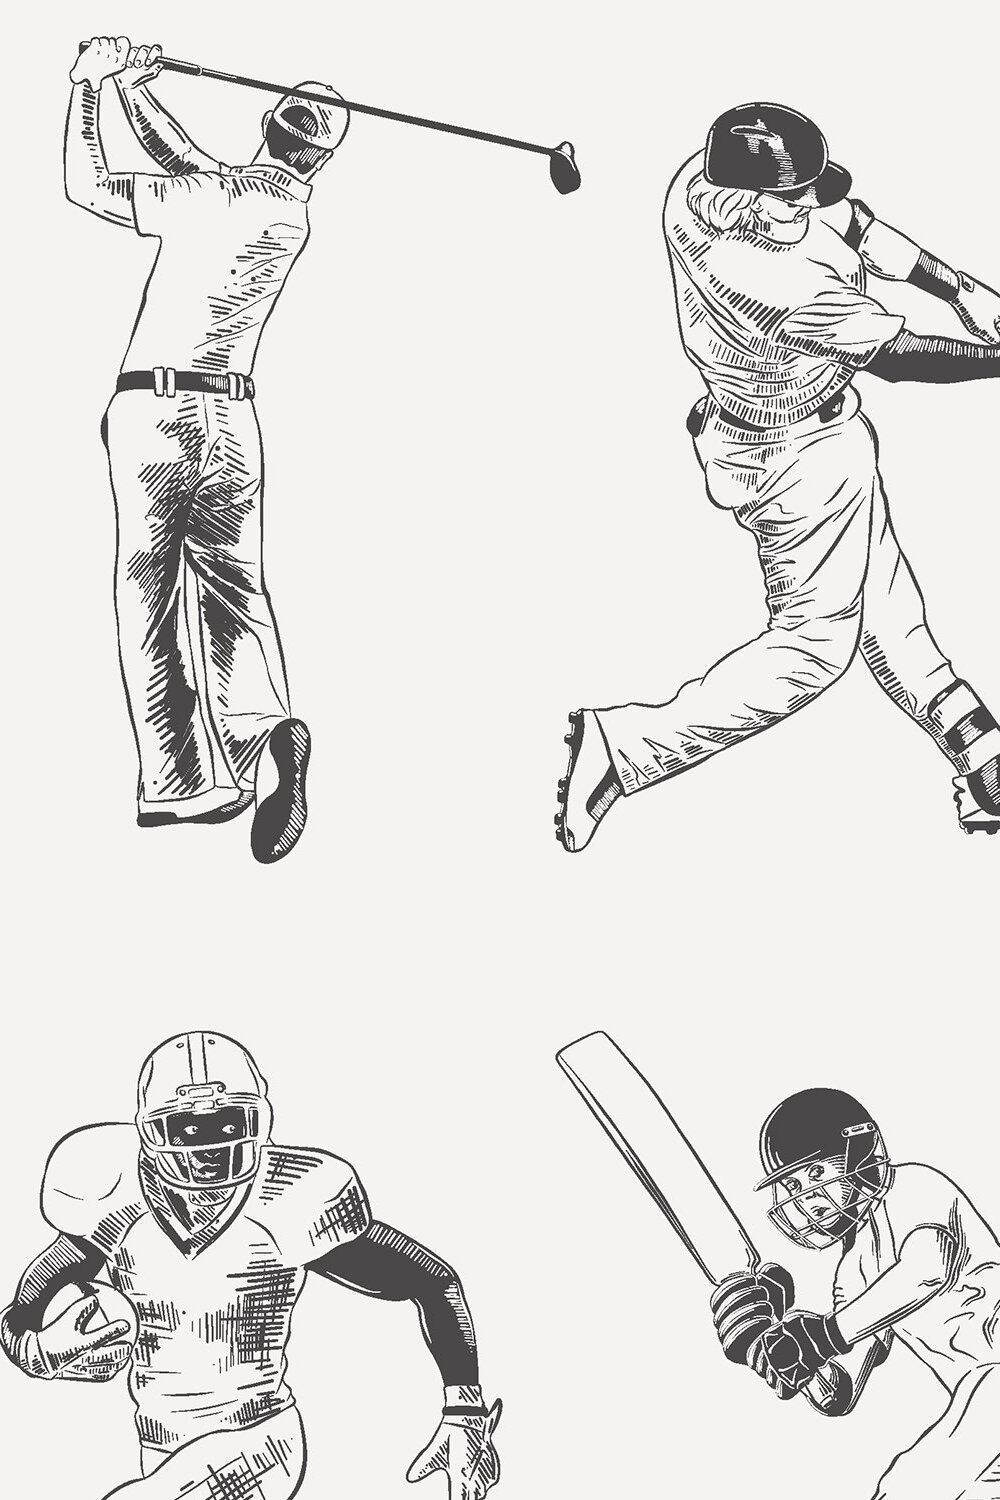 Black and white drawing of baseball players.